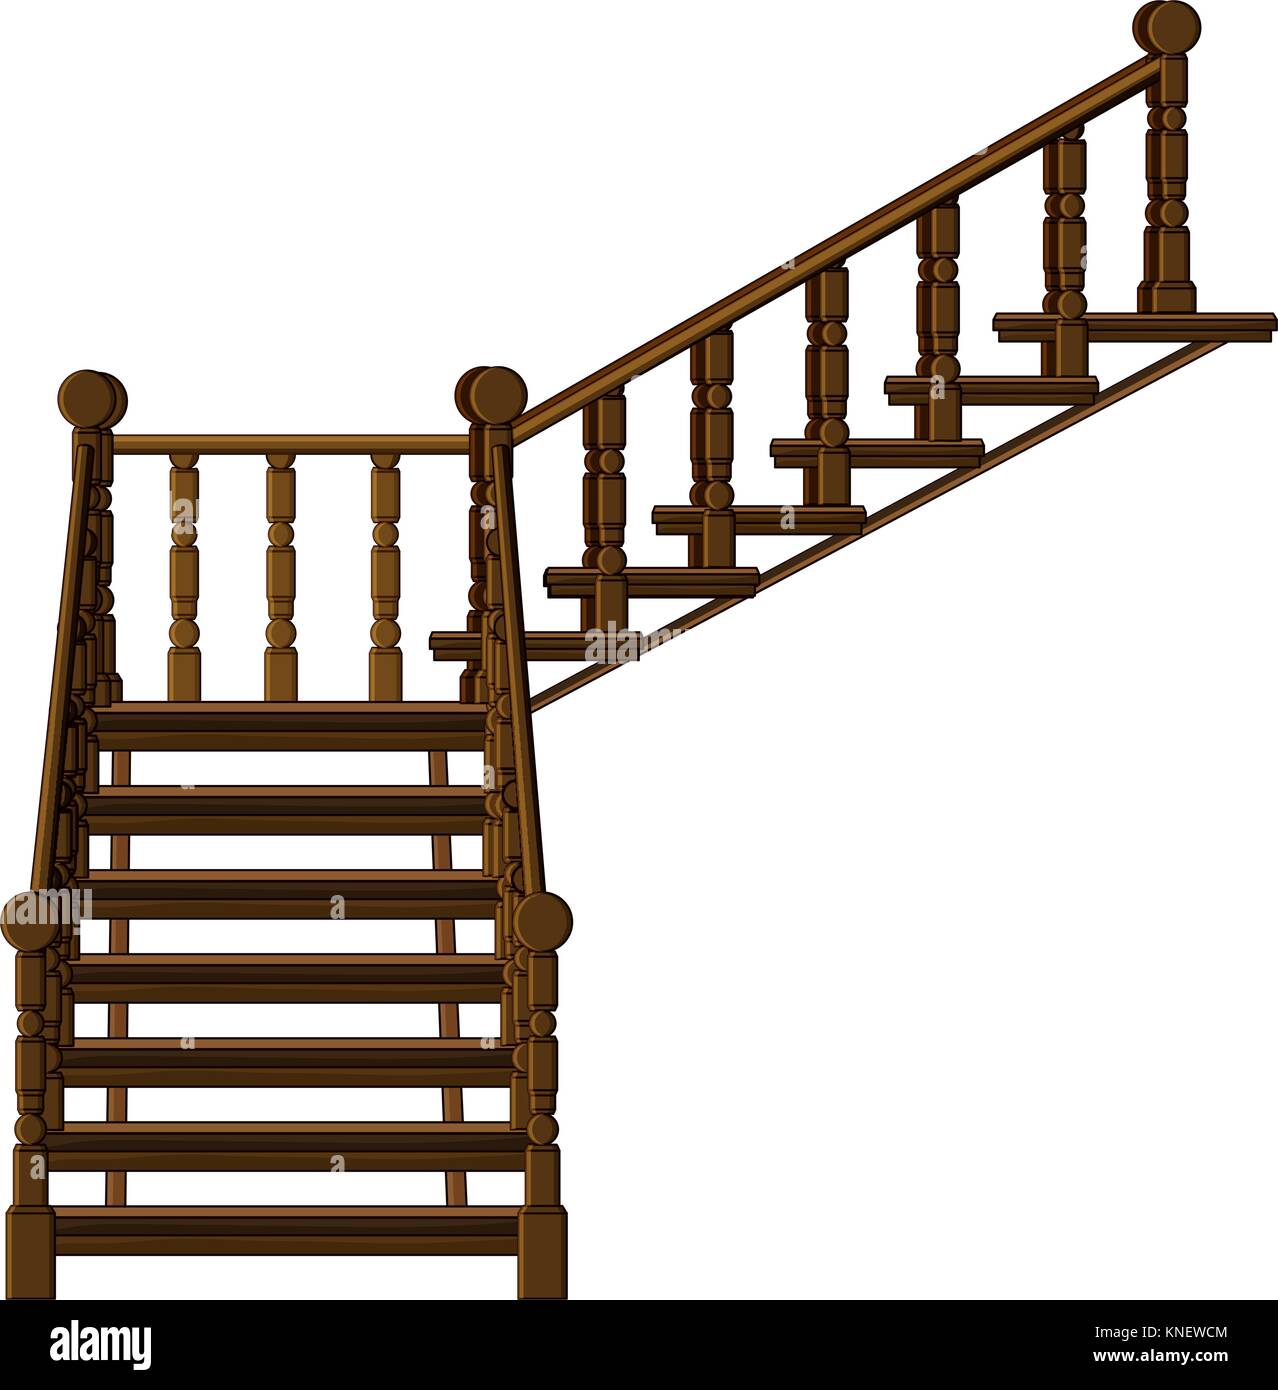 Illustration of a staircase on a white background Stock Vector